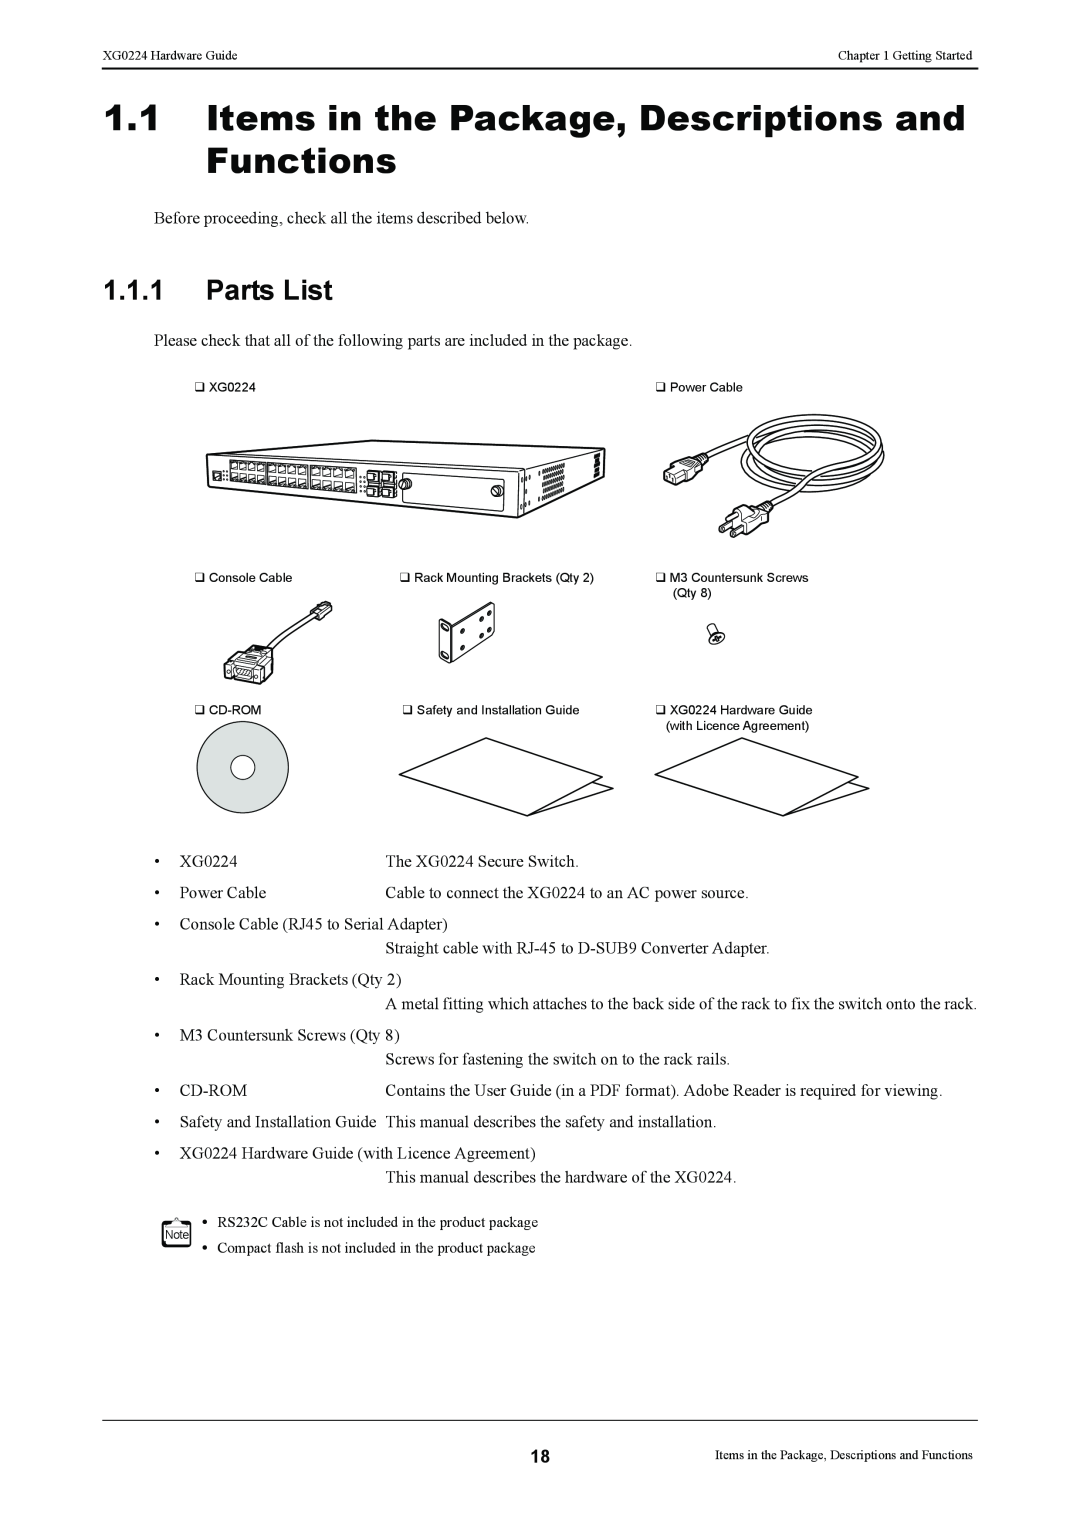 Fujitsu XG0224 manual Items in the Package, Descriptions and Functions, Parts List 